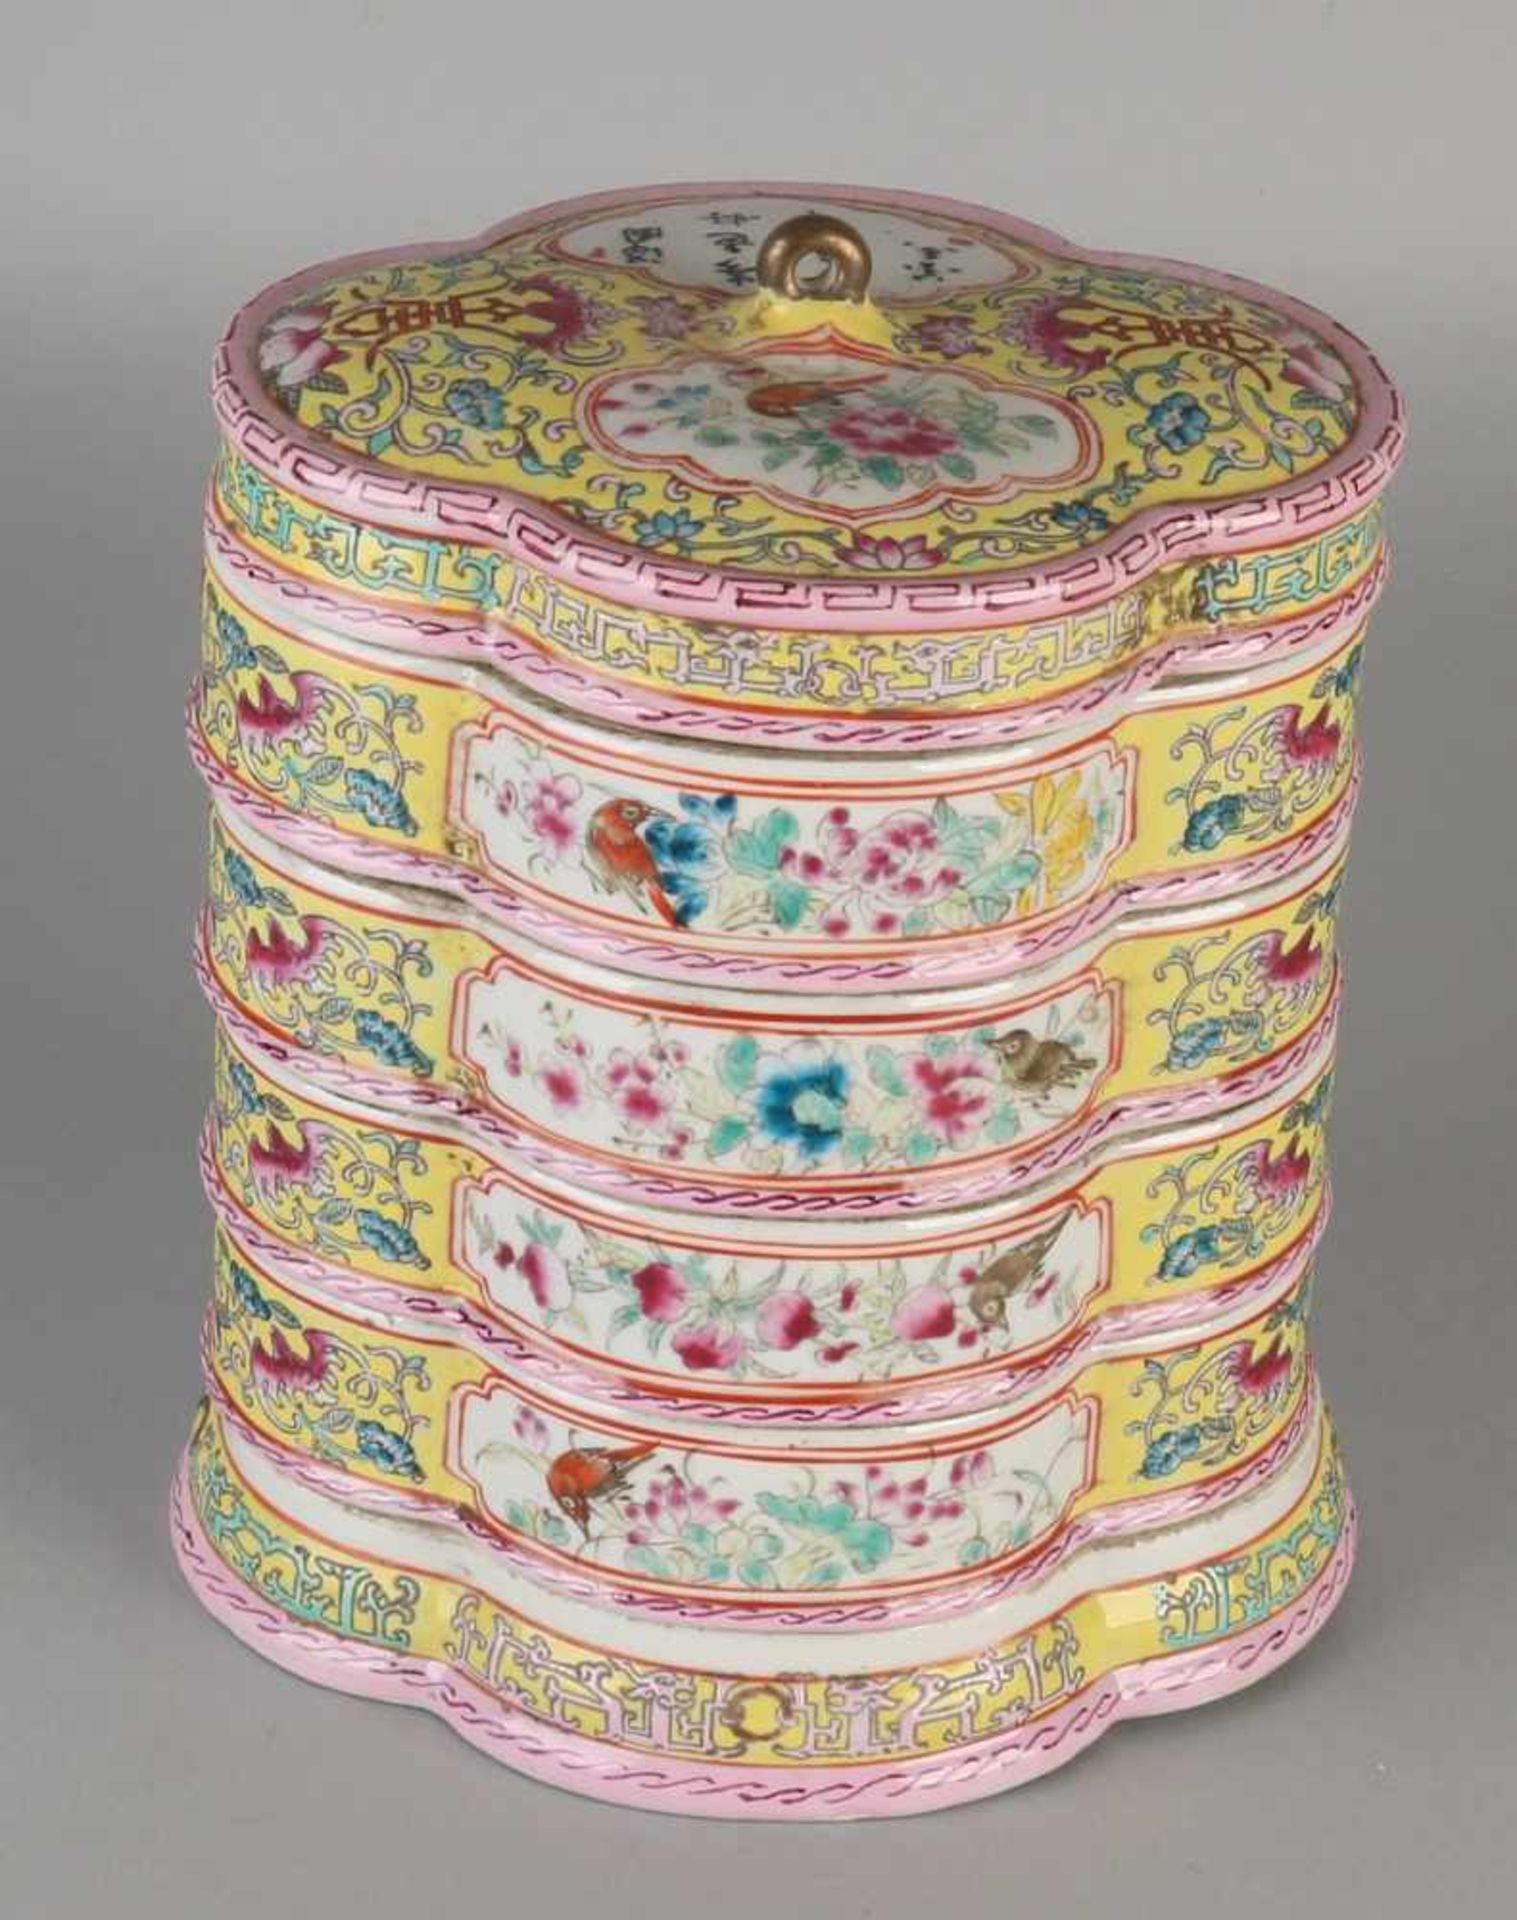 Large Chinese porcelain Family Rose pile box with text, floral, bat and bird decor. With bottom